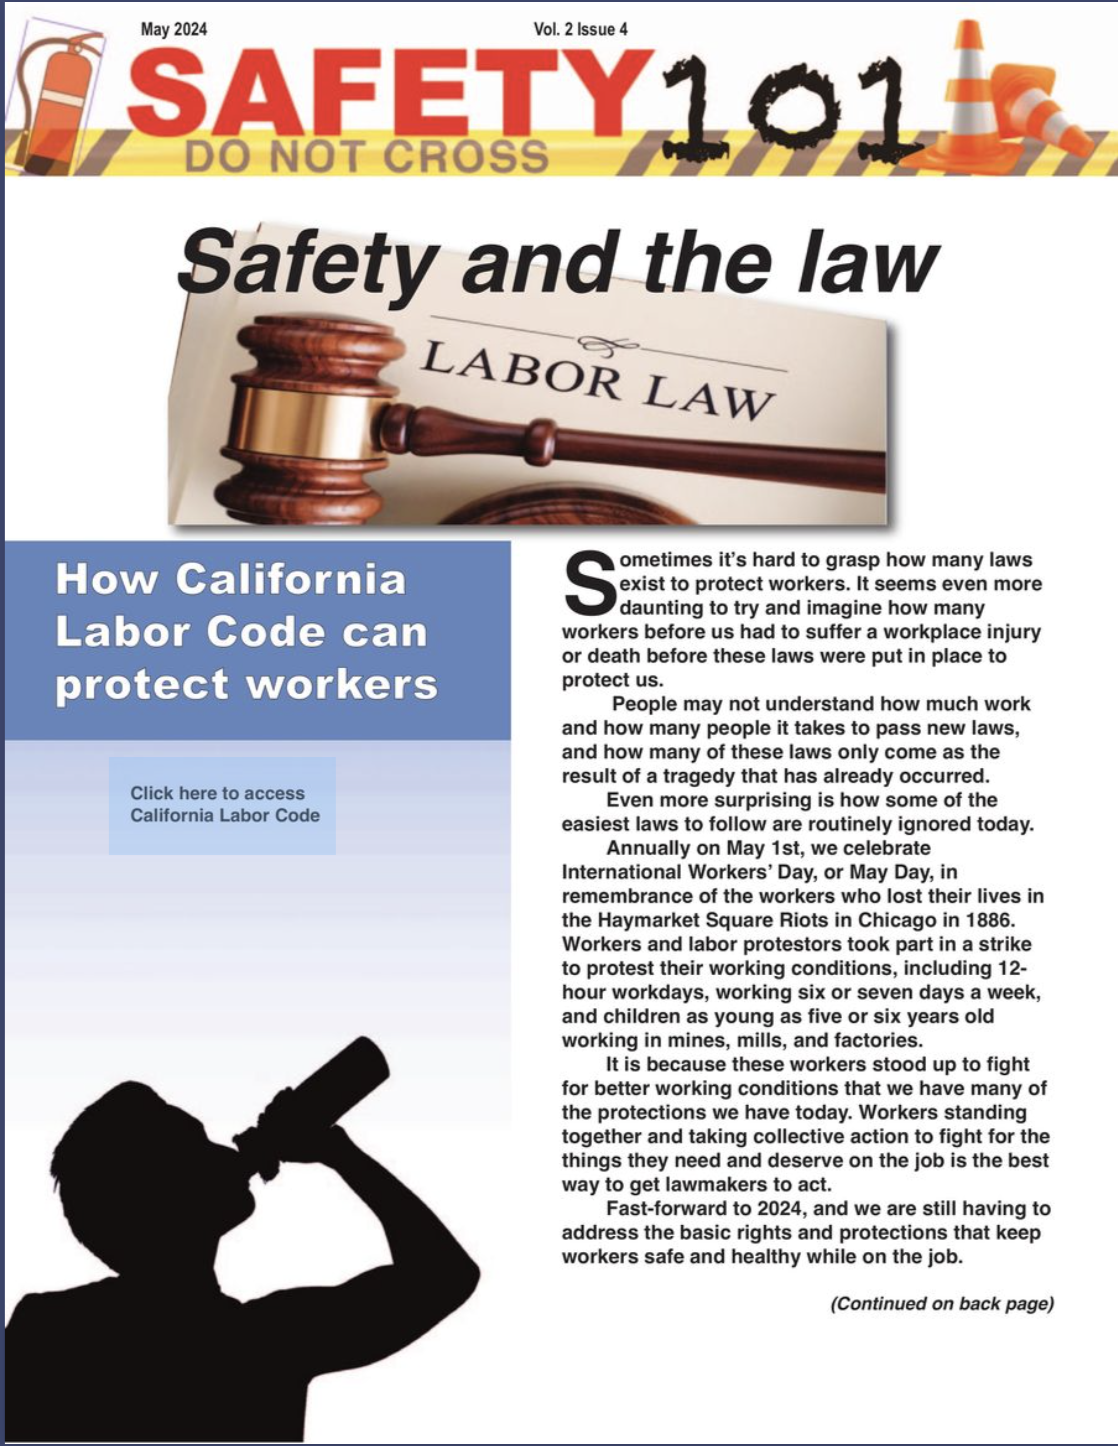 Safety 101 Newsletter-May 2024